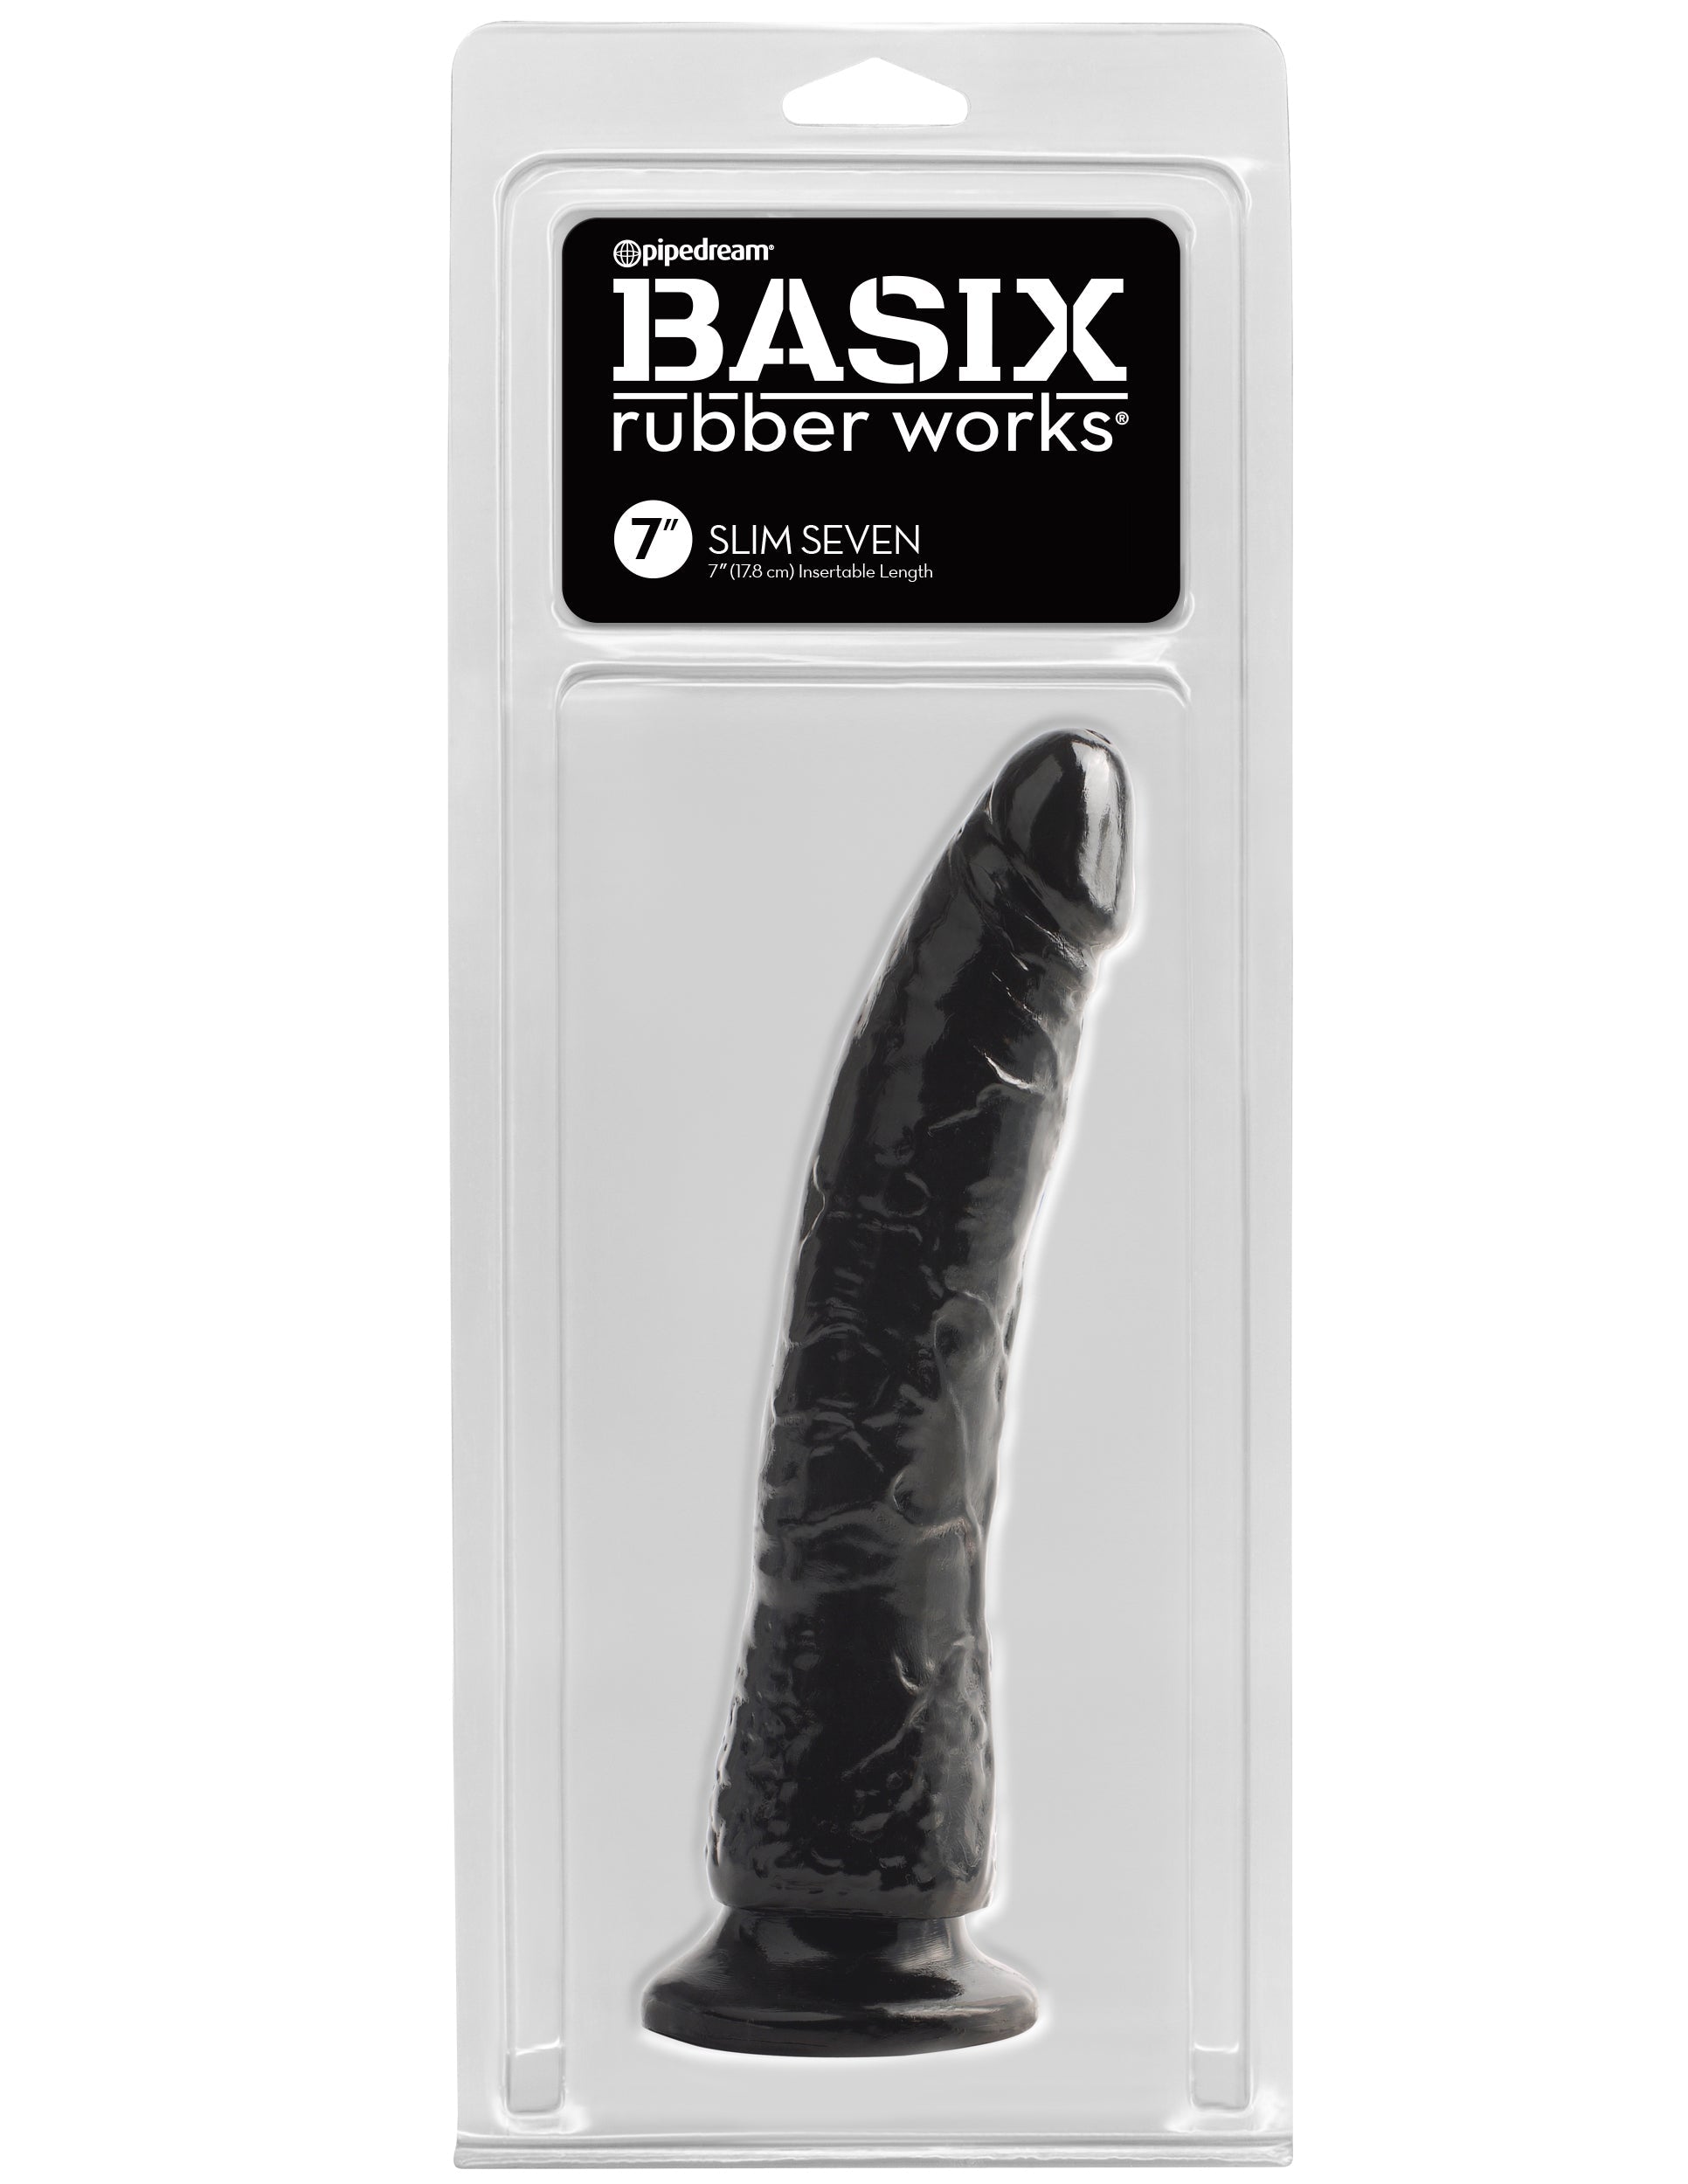 Basix Rubber Works - Slim 7 Inch With Suction Cup - Black-1